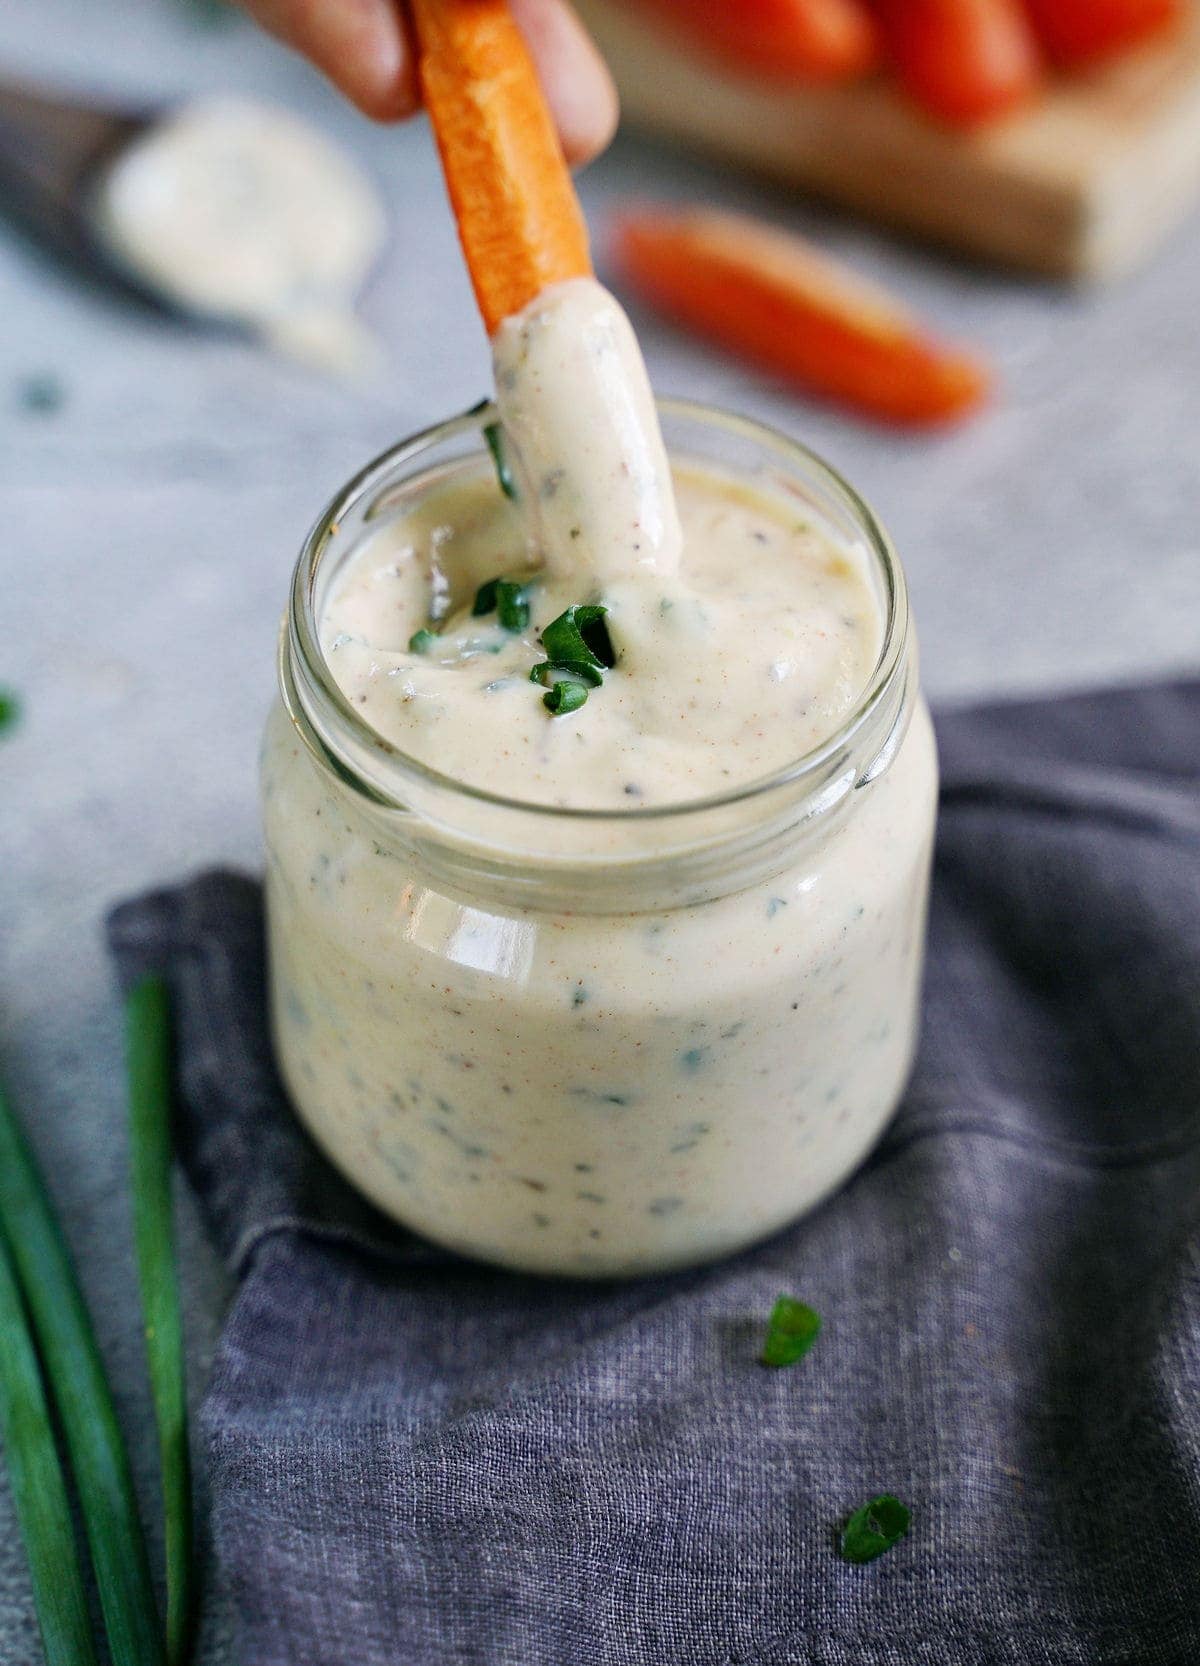 dipping carrot stick into ranch dip in glass jar